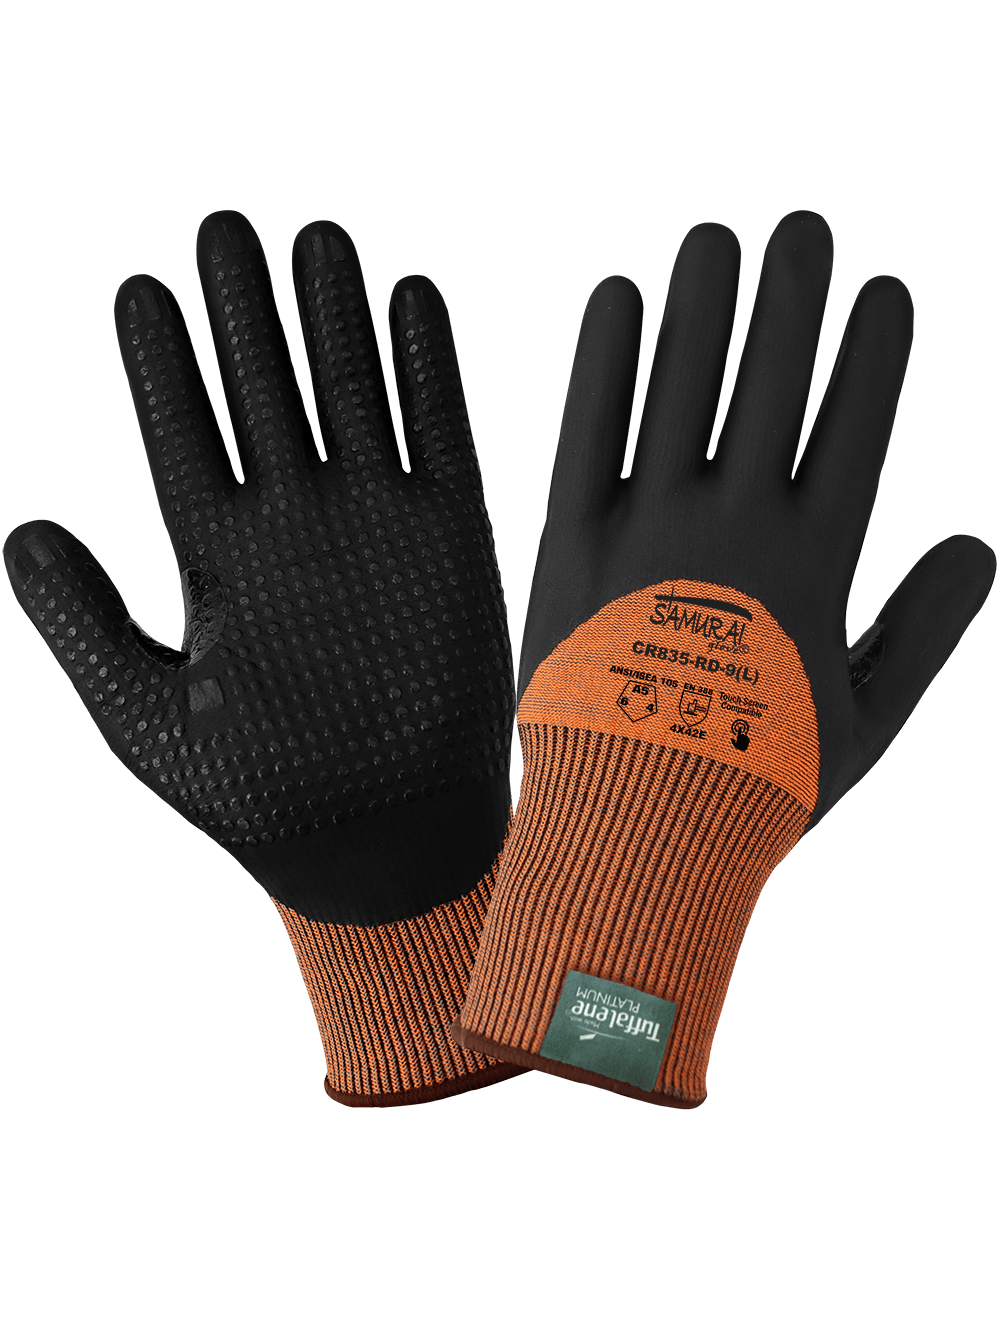 Samurai Glove® High-Visibility Cut Resistant Three-Quarter Coated Touch Screen Gloves Made with 15-Gauge Tuffalene® Platinum - CR835-RD